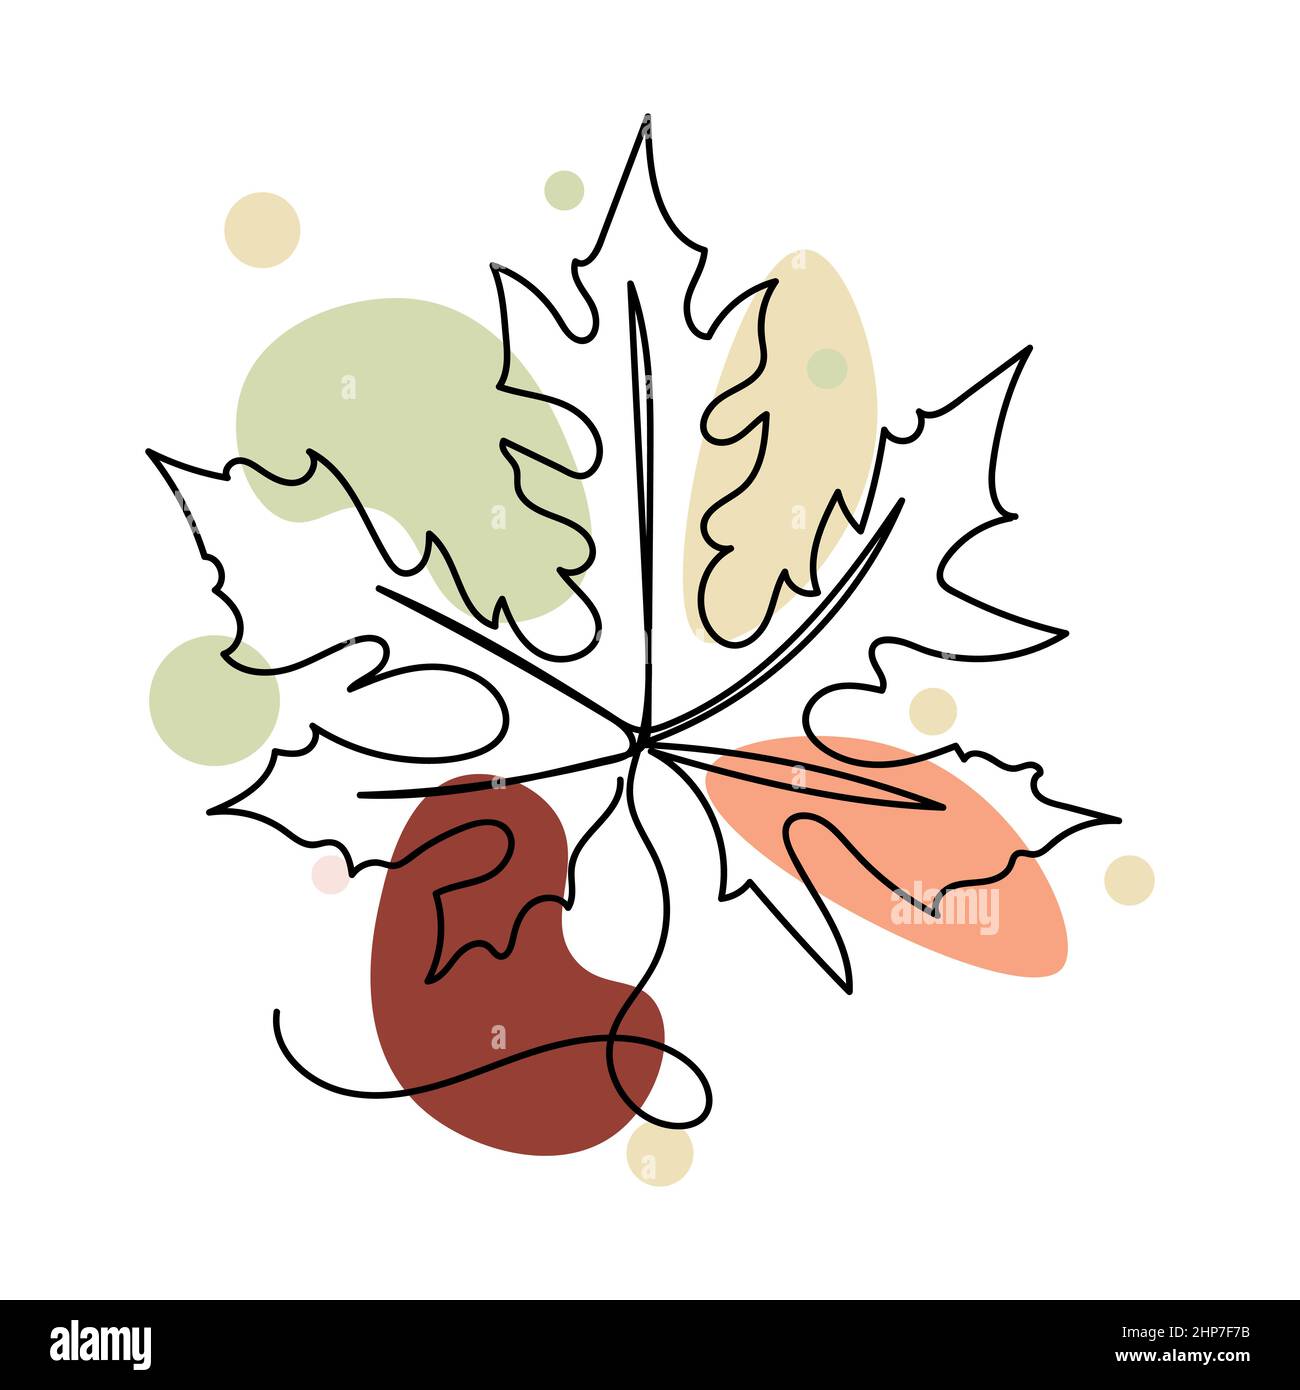 How to Draw Maple Leaves  Easy Leaf step by step drawing lesson  How to  Draw Step by Step Drawing Tutorials